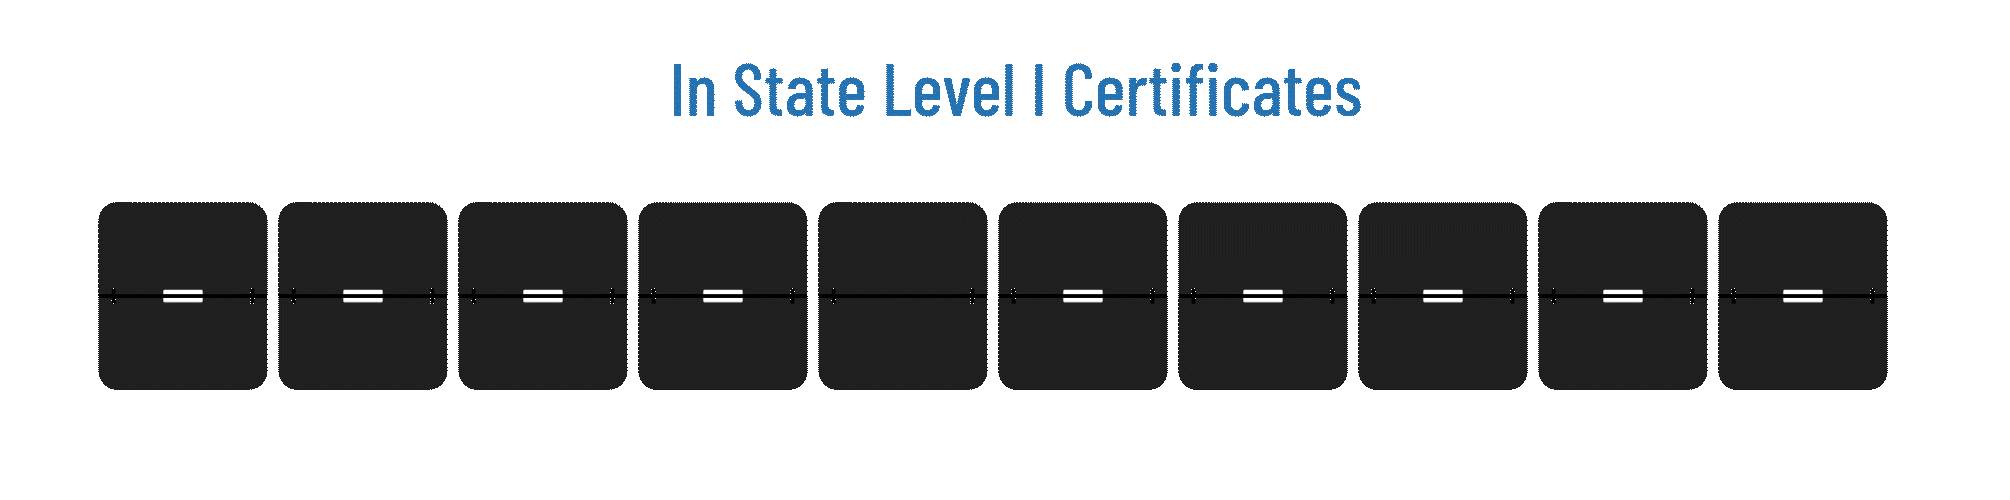 In State Level I Certificates - 1 week